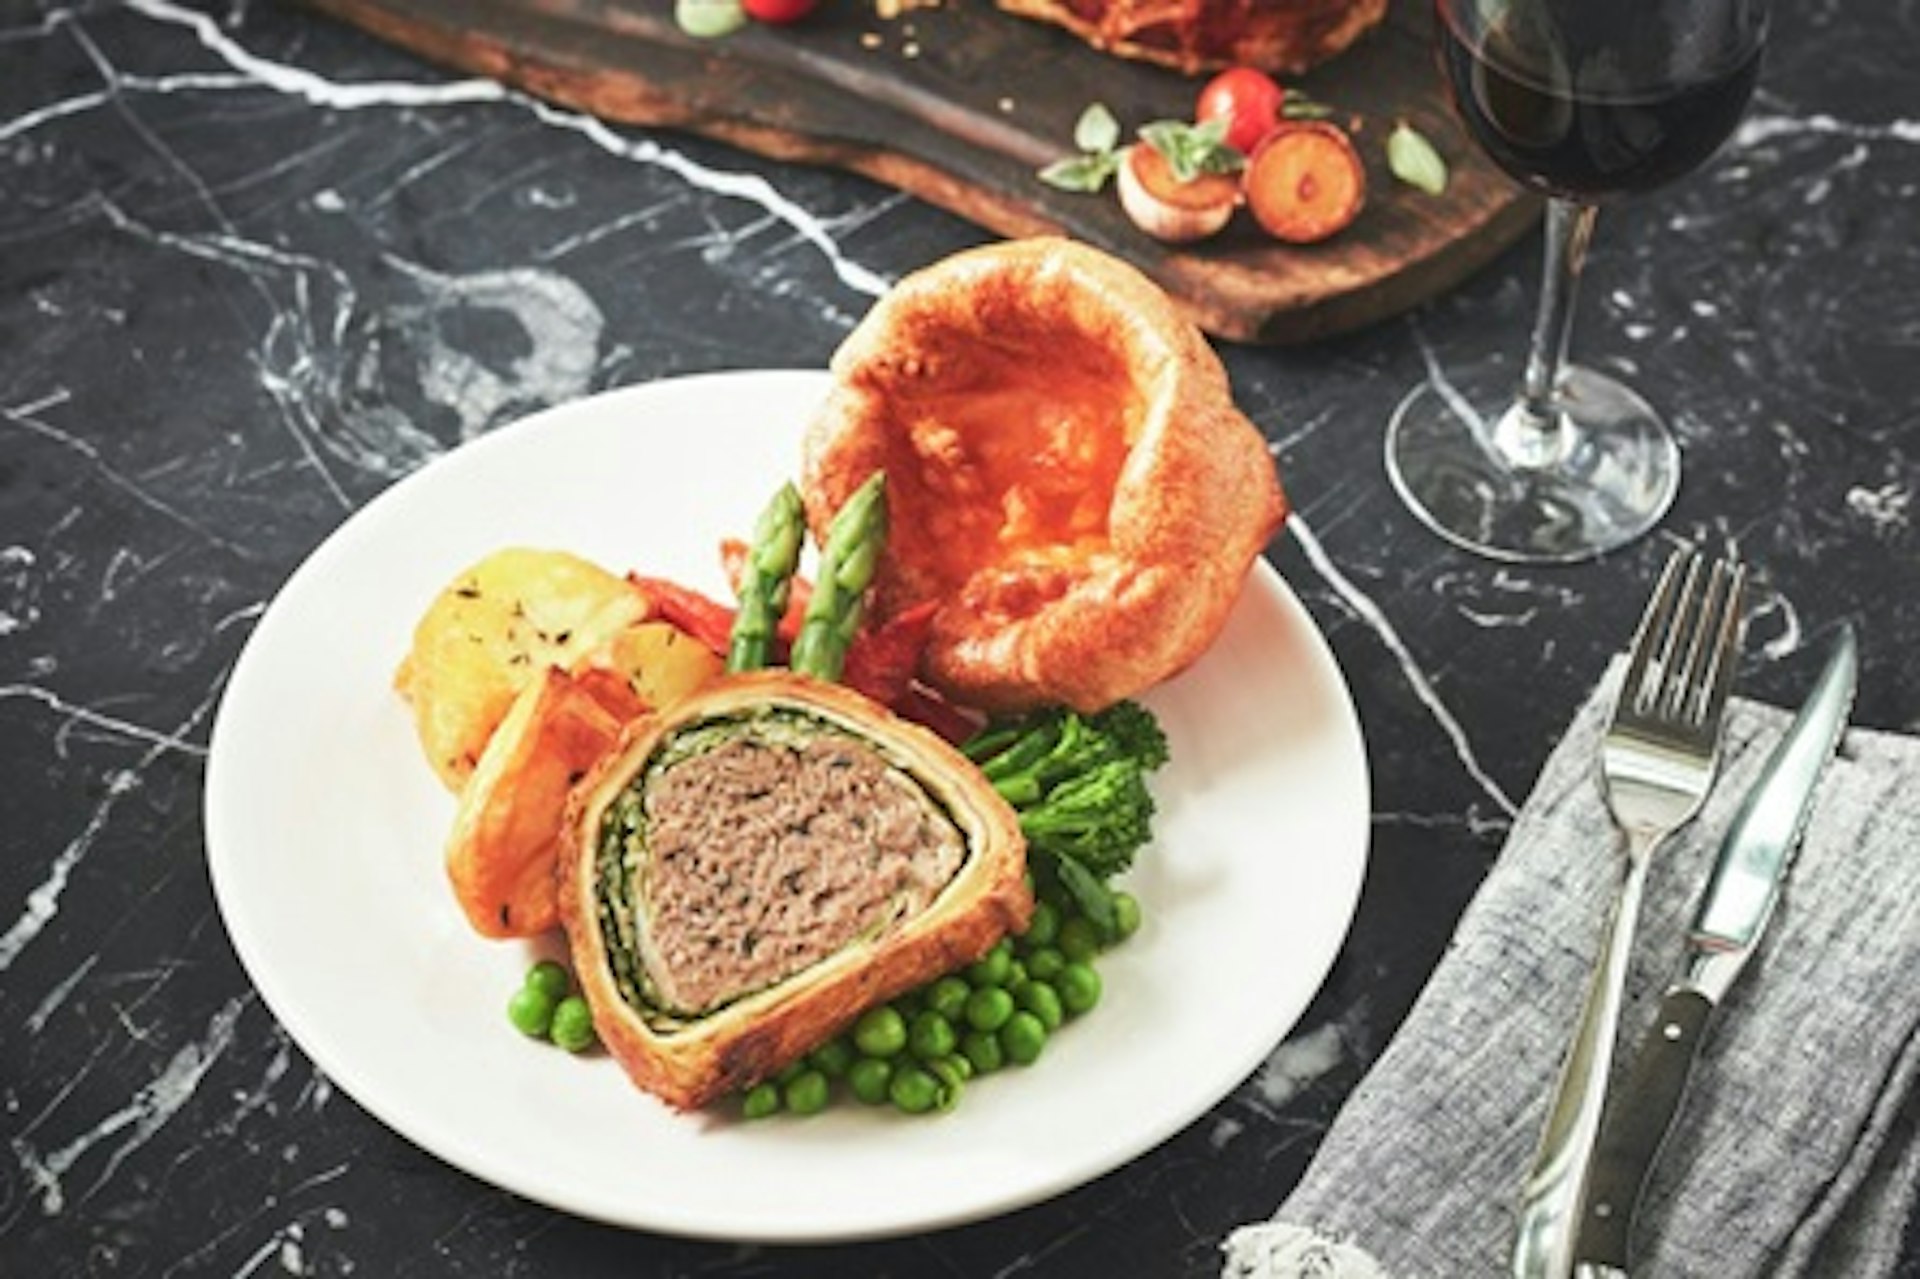 Sunday Roast for Two at a Gordon Ramsay Restaurant 3